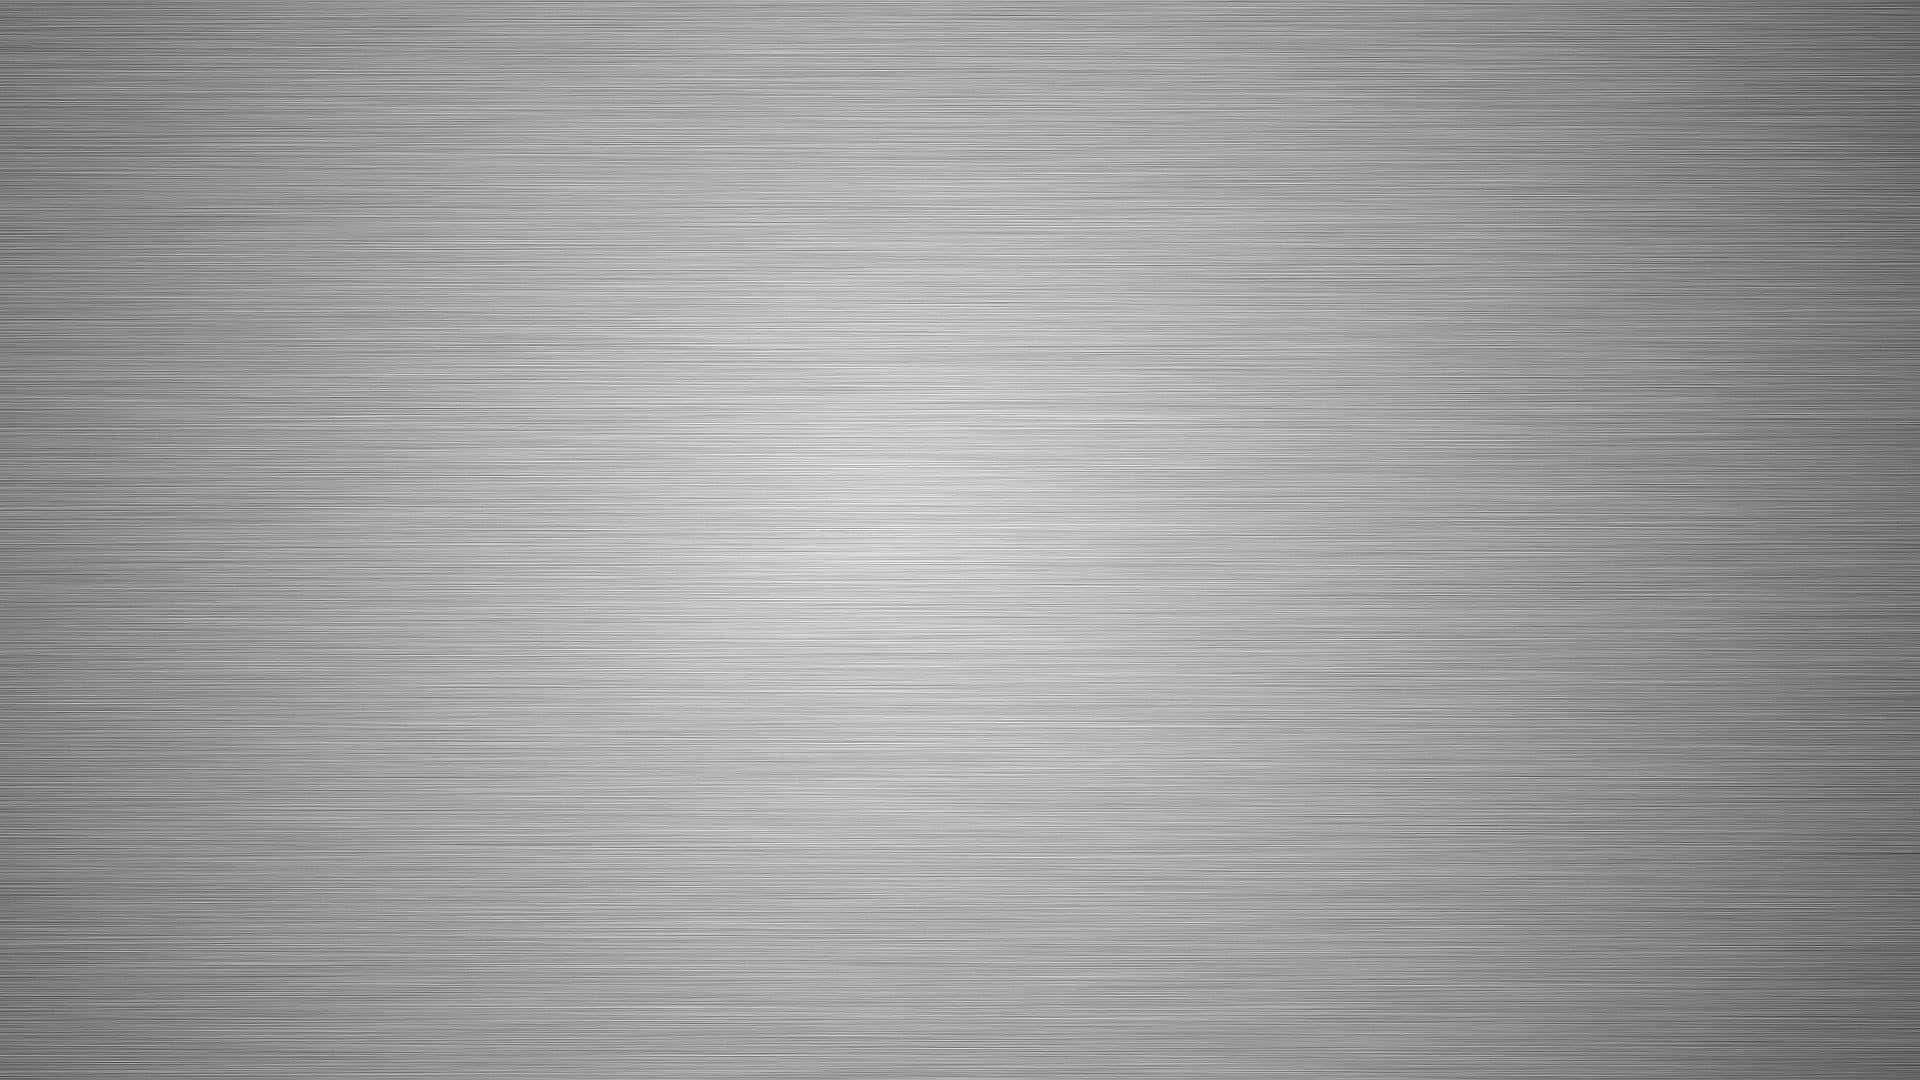 A Silver Metal Texture Background